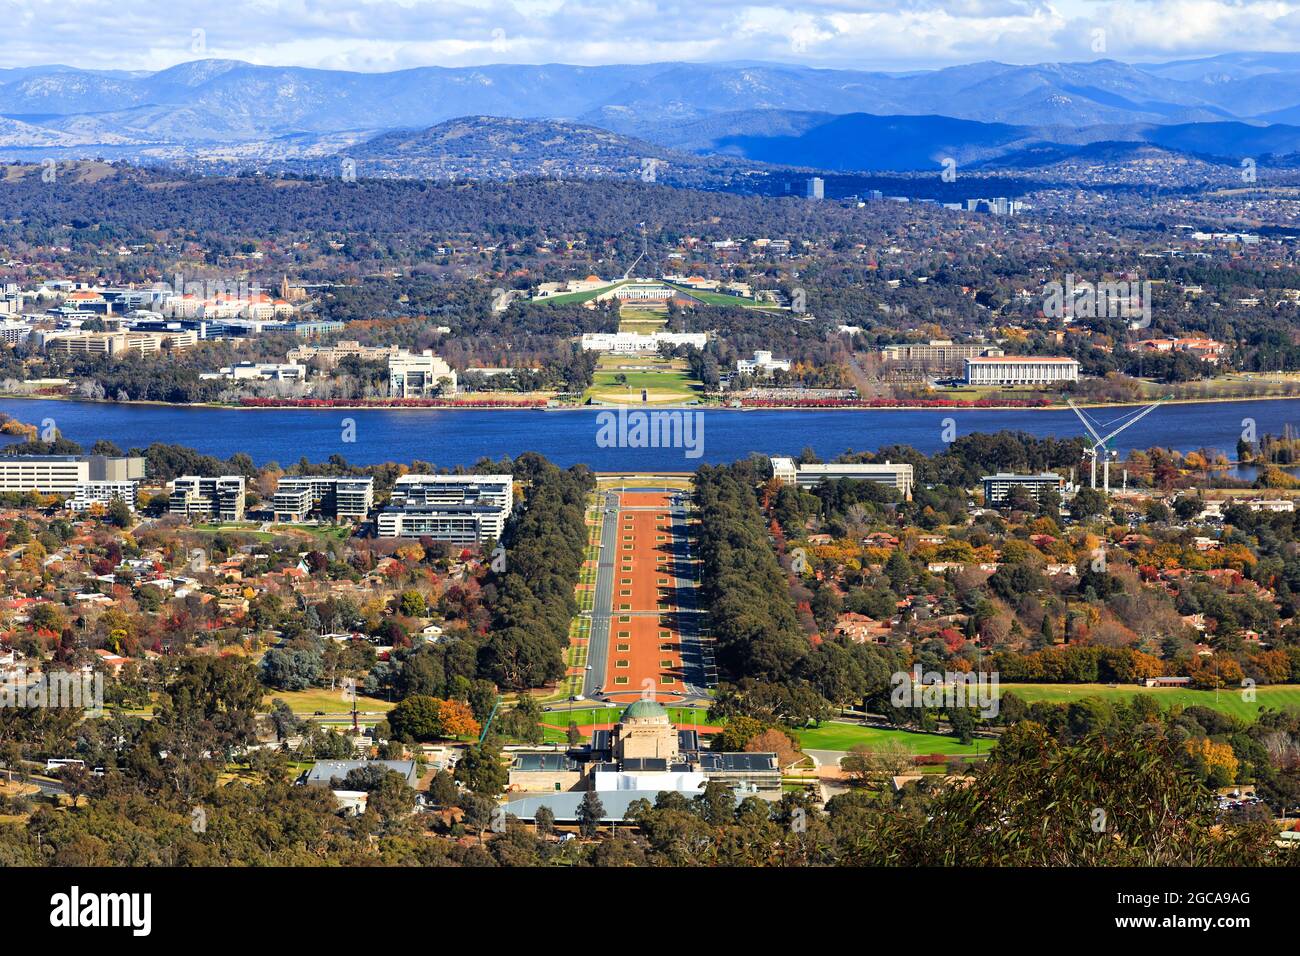 Capitol hill with the national federal parliament hose across Lake Burley Griffin in Canberra, ACT, australia. Stock Photo